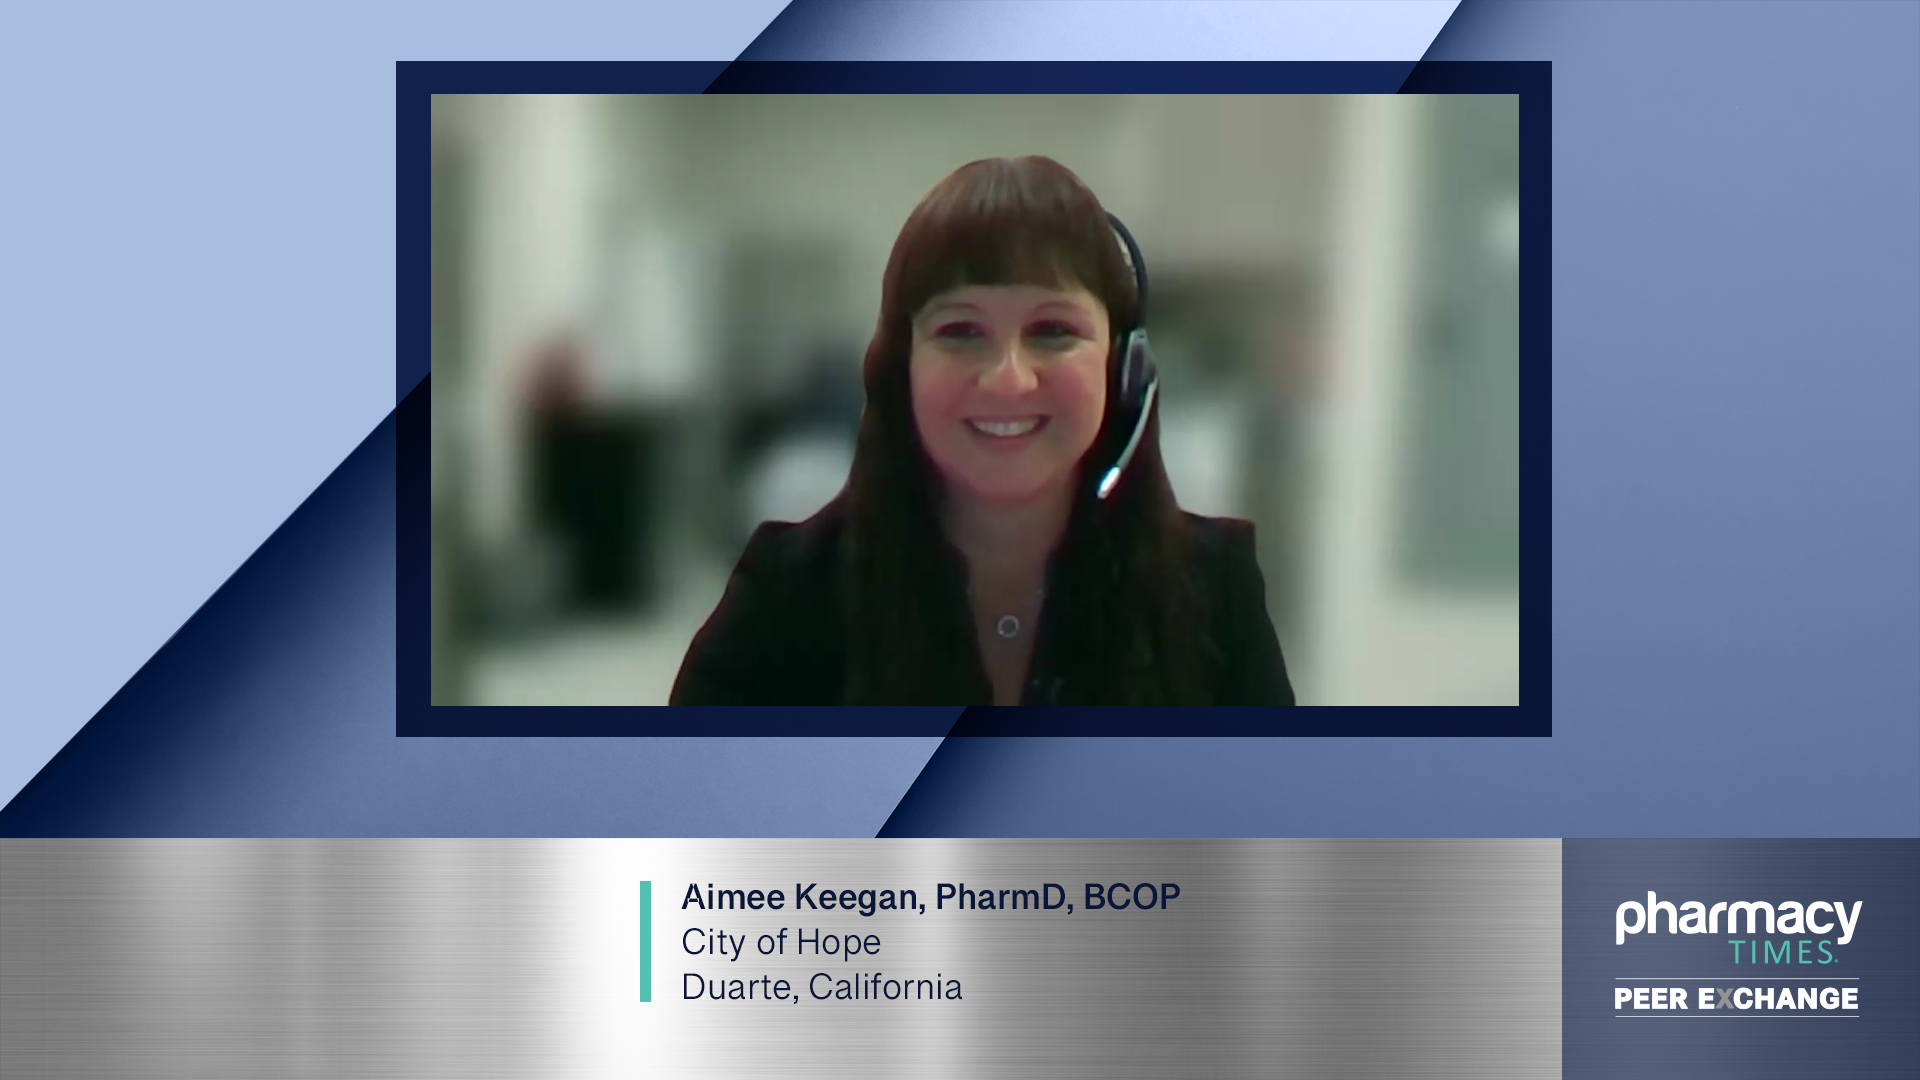 Optimizing Adherence to CDK4/6 Inhibitors in Metastatic Breast Cancer